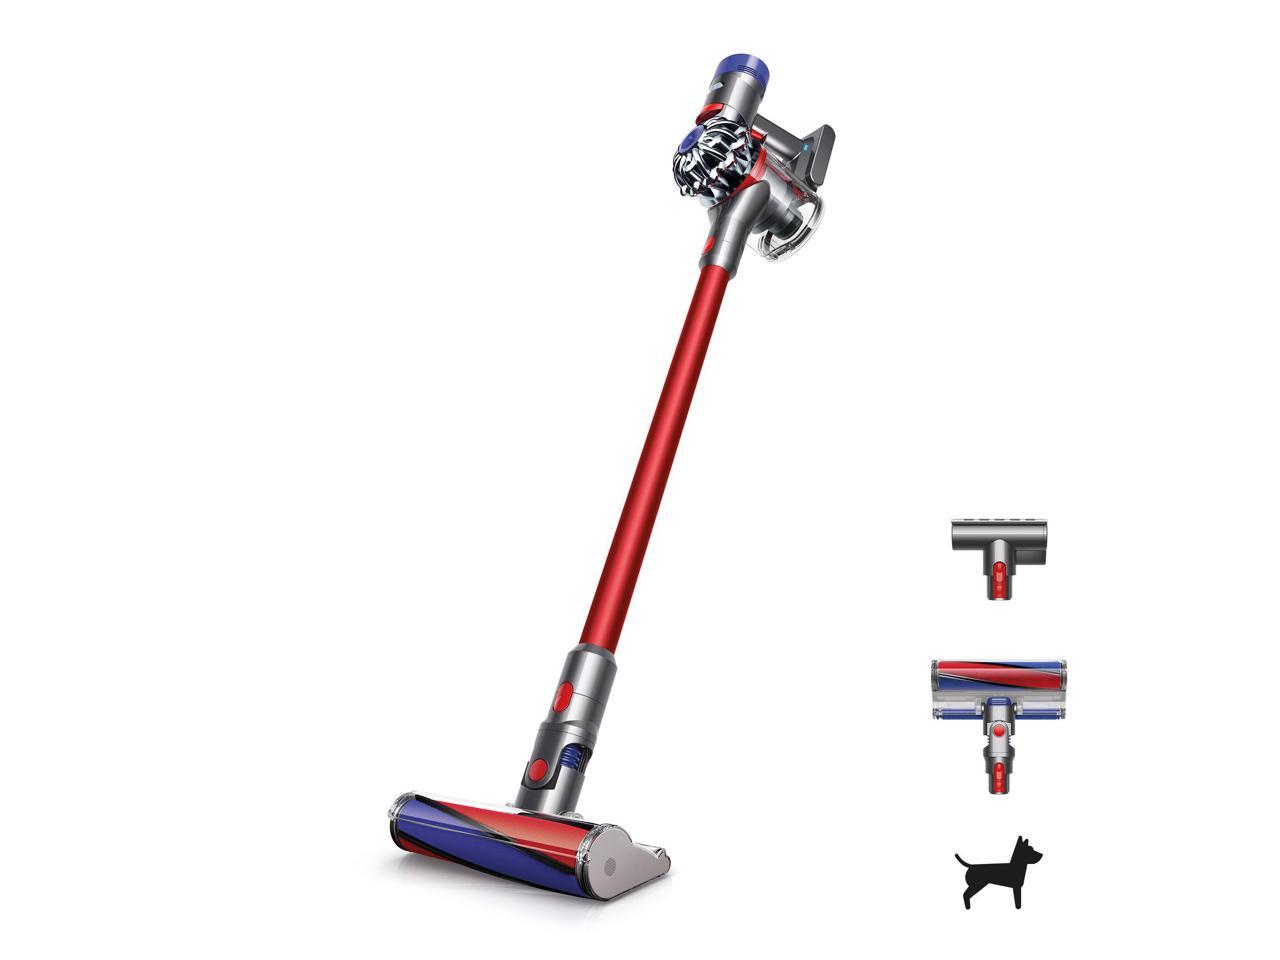 Dyson V8 Fluffy Cordless Vacuum - Red for $299 $299.99